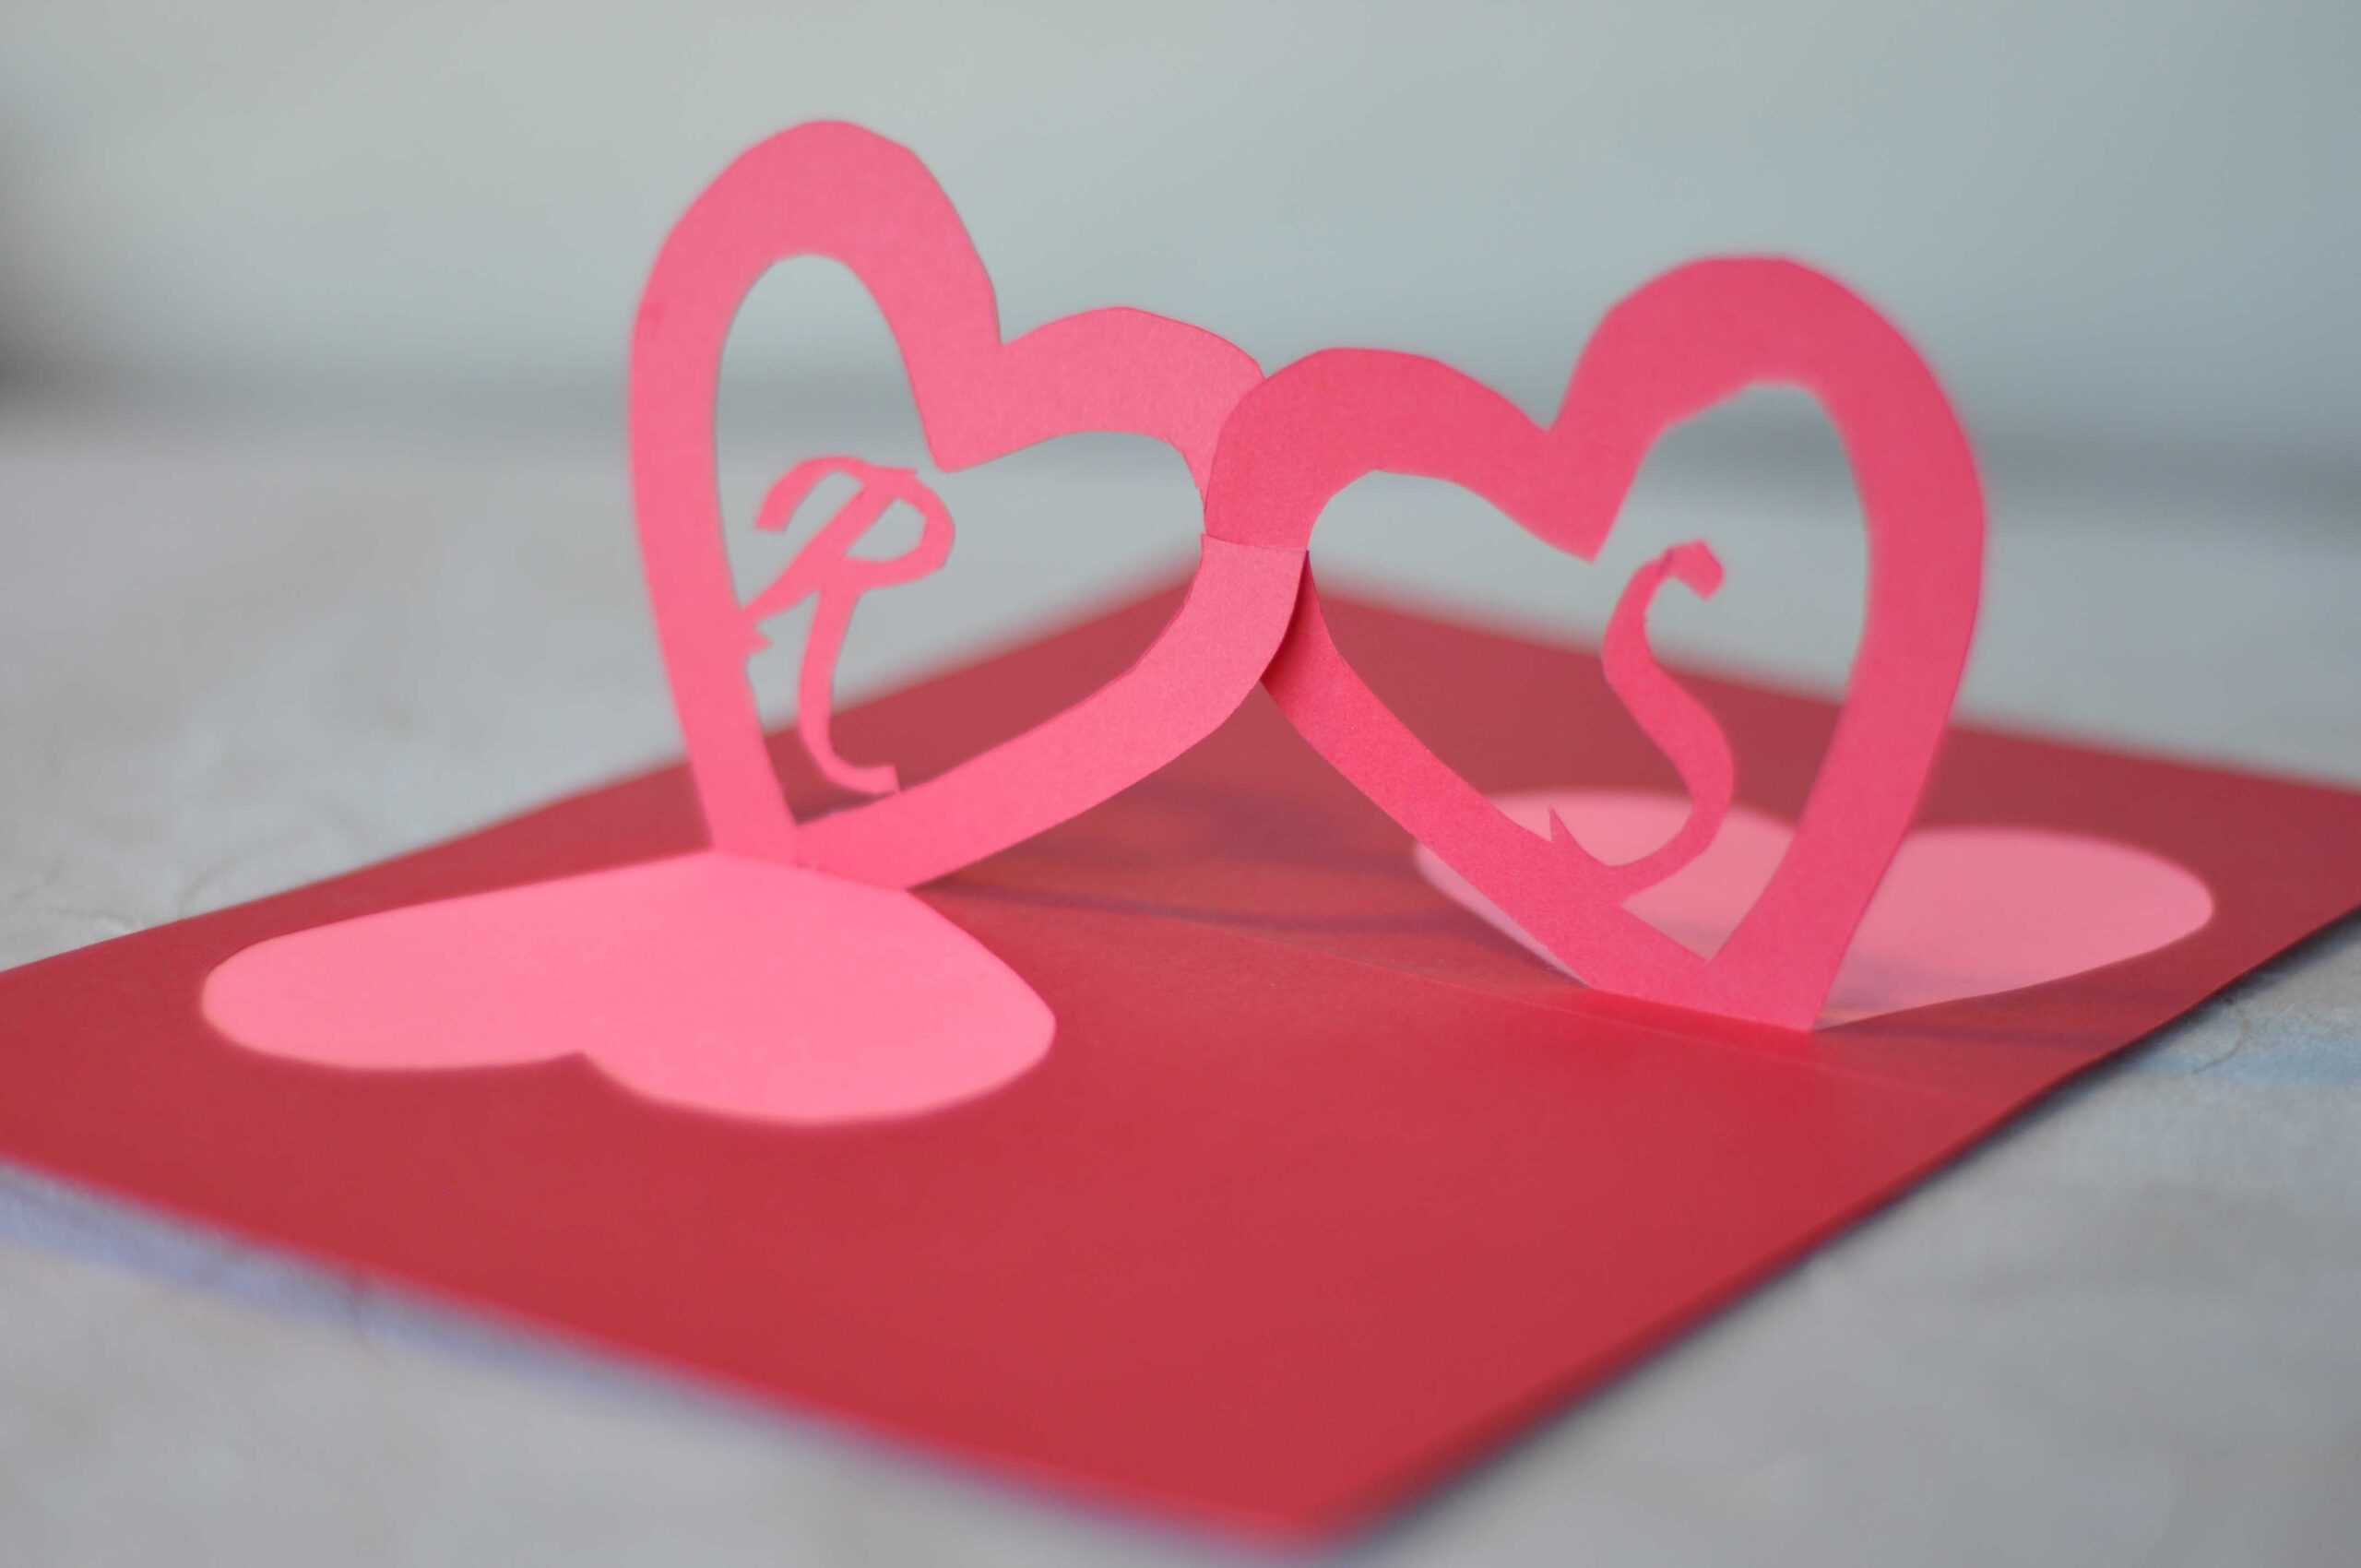 Linked Hearts Pop Up Card Template For 3D Heart Pop Up Card Template Pdf